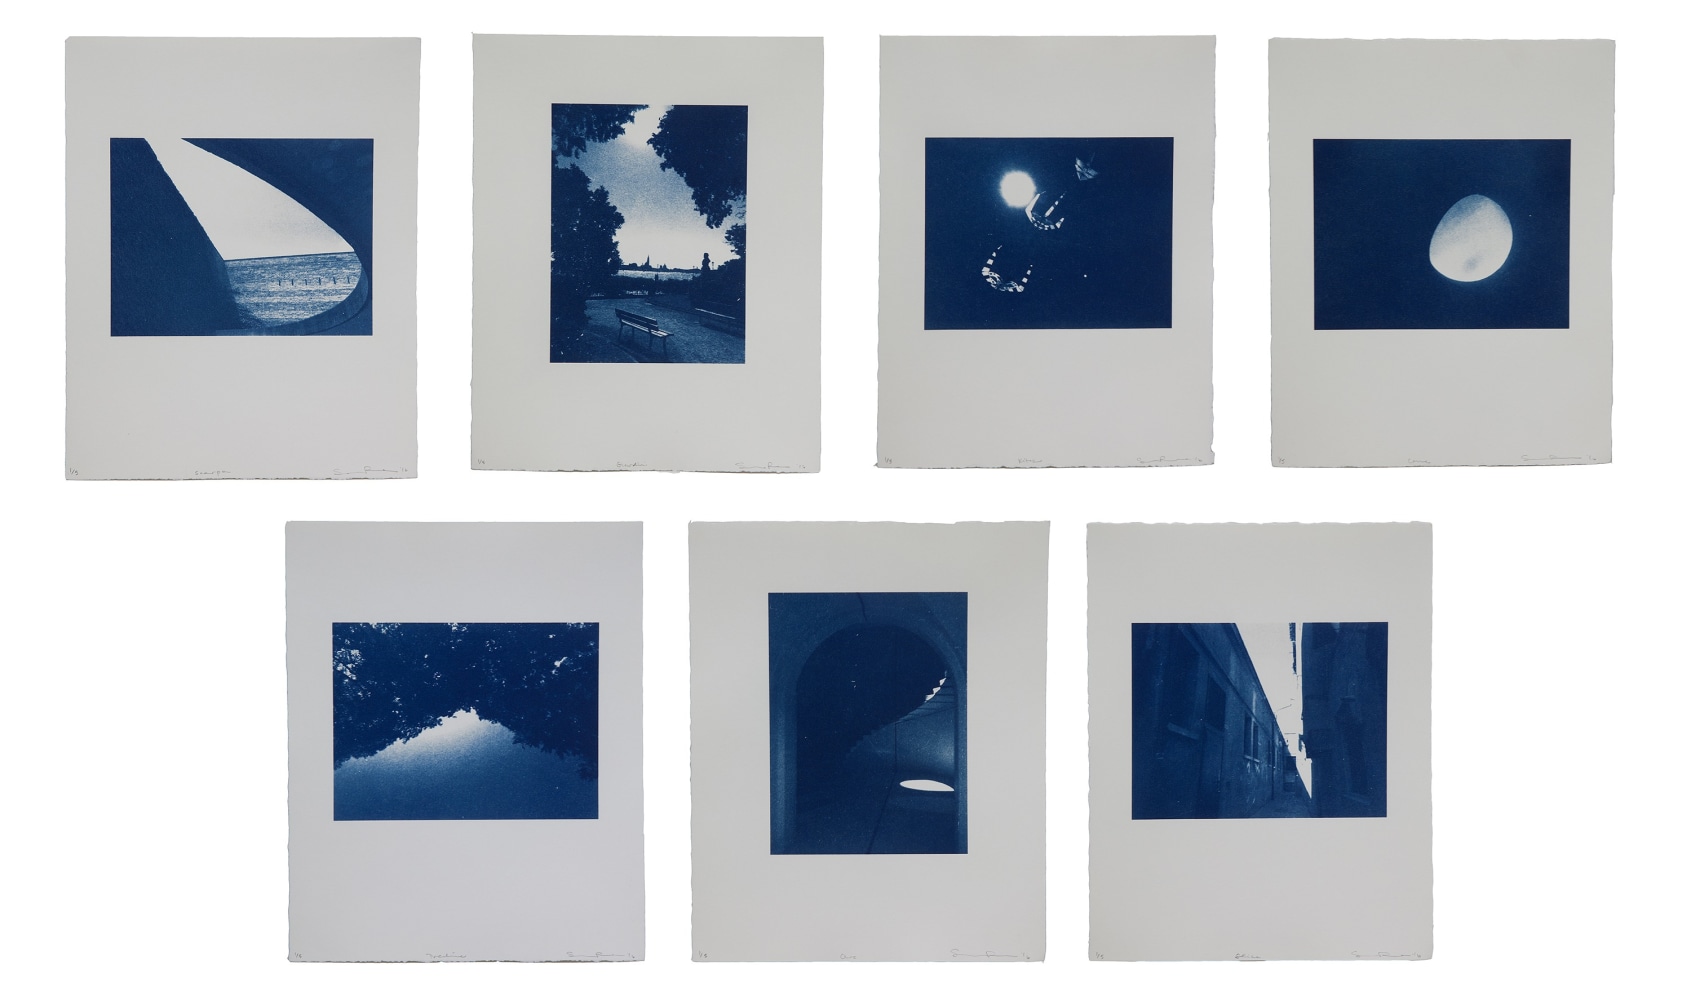 Lightforms: Venice I-VII, Scarpa, Giardini, Kites, Cone, Treeline, Arch, Sliver
Serena Perrone, 2016

Suite of 7 cyanotypes on Stonehenge paper
10&amp;quot; x 8&amp;quot; each
Edition of 5
$4000

Published by Cade Tompkins Projects

INQUIRE